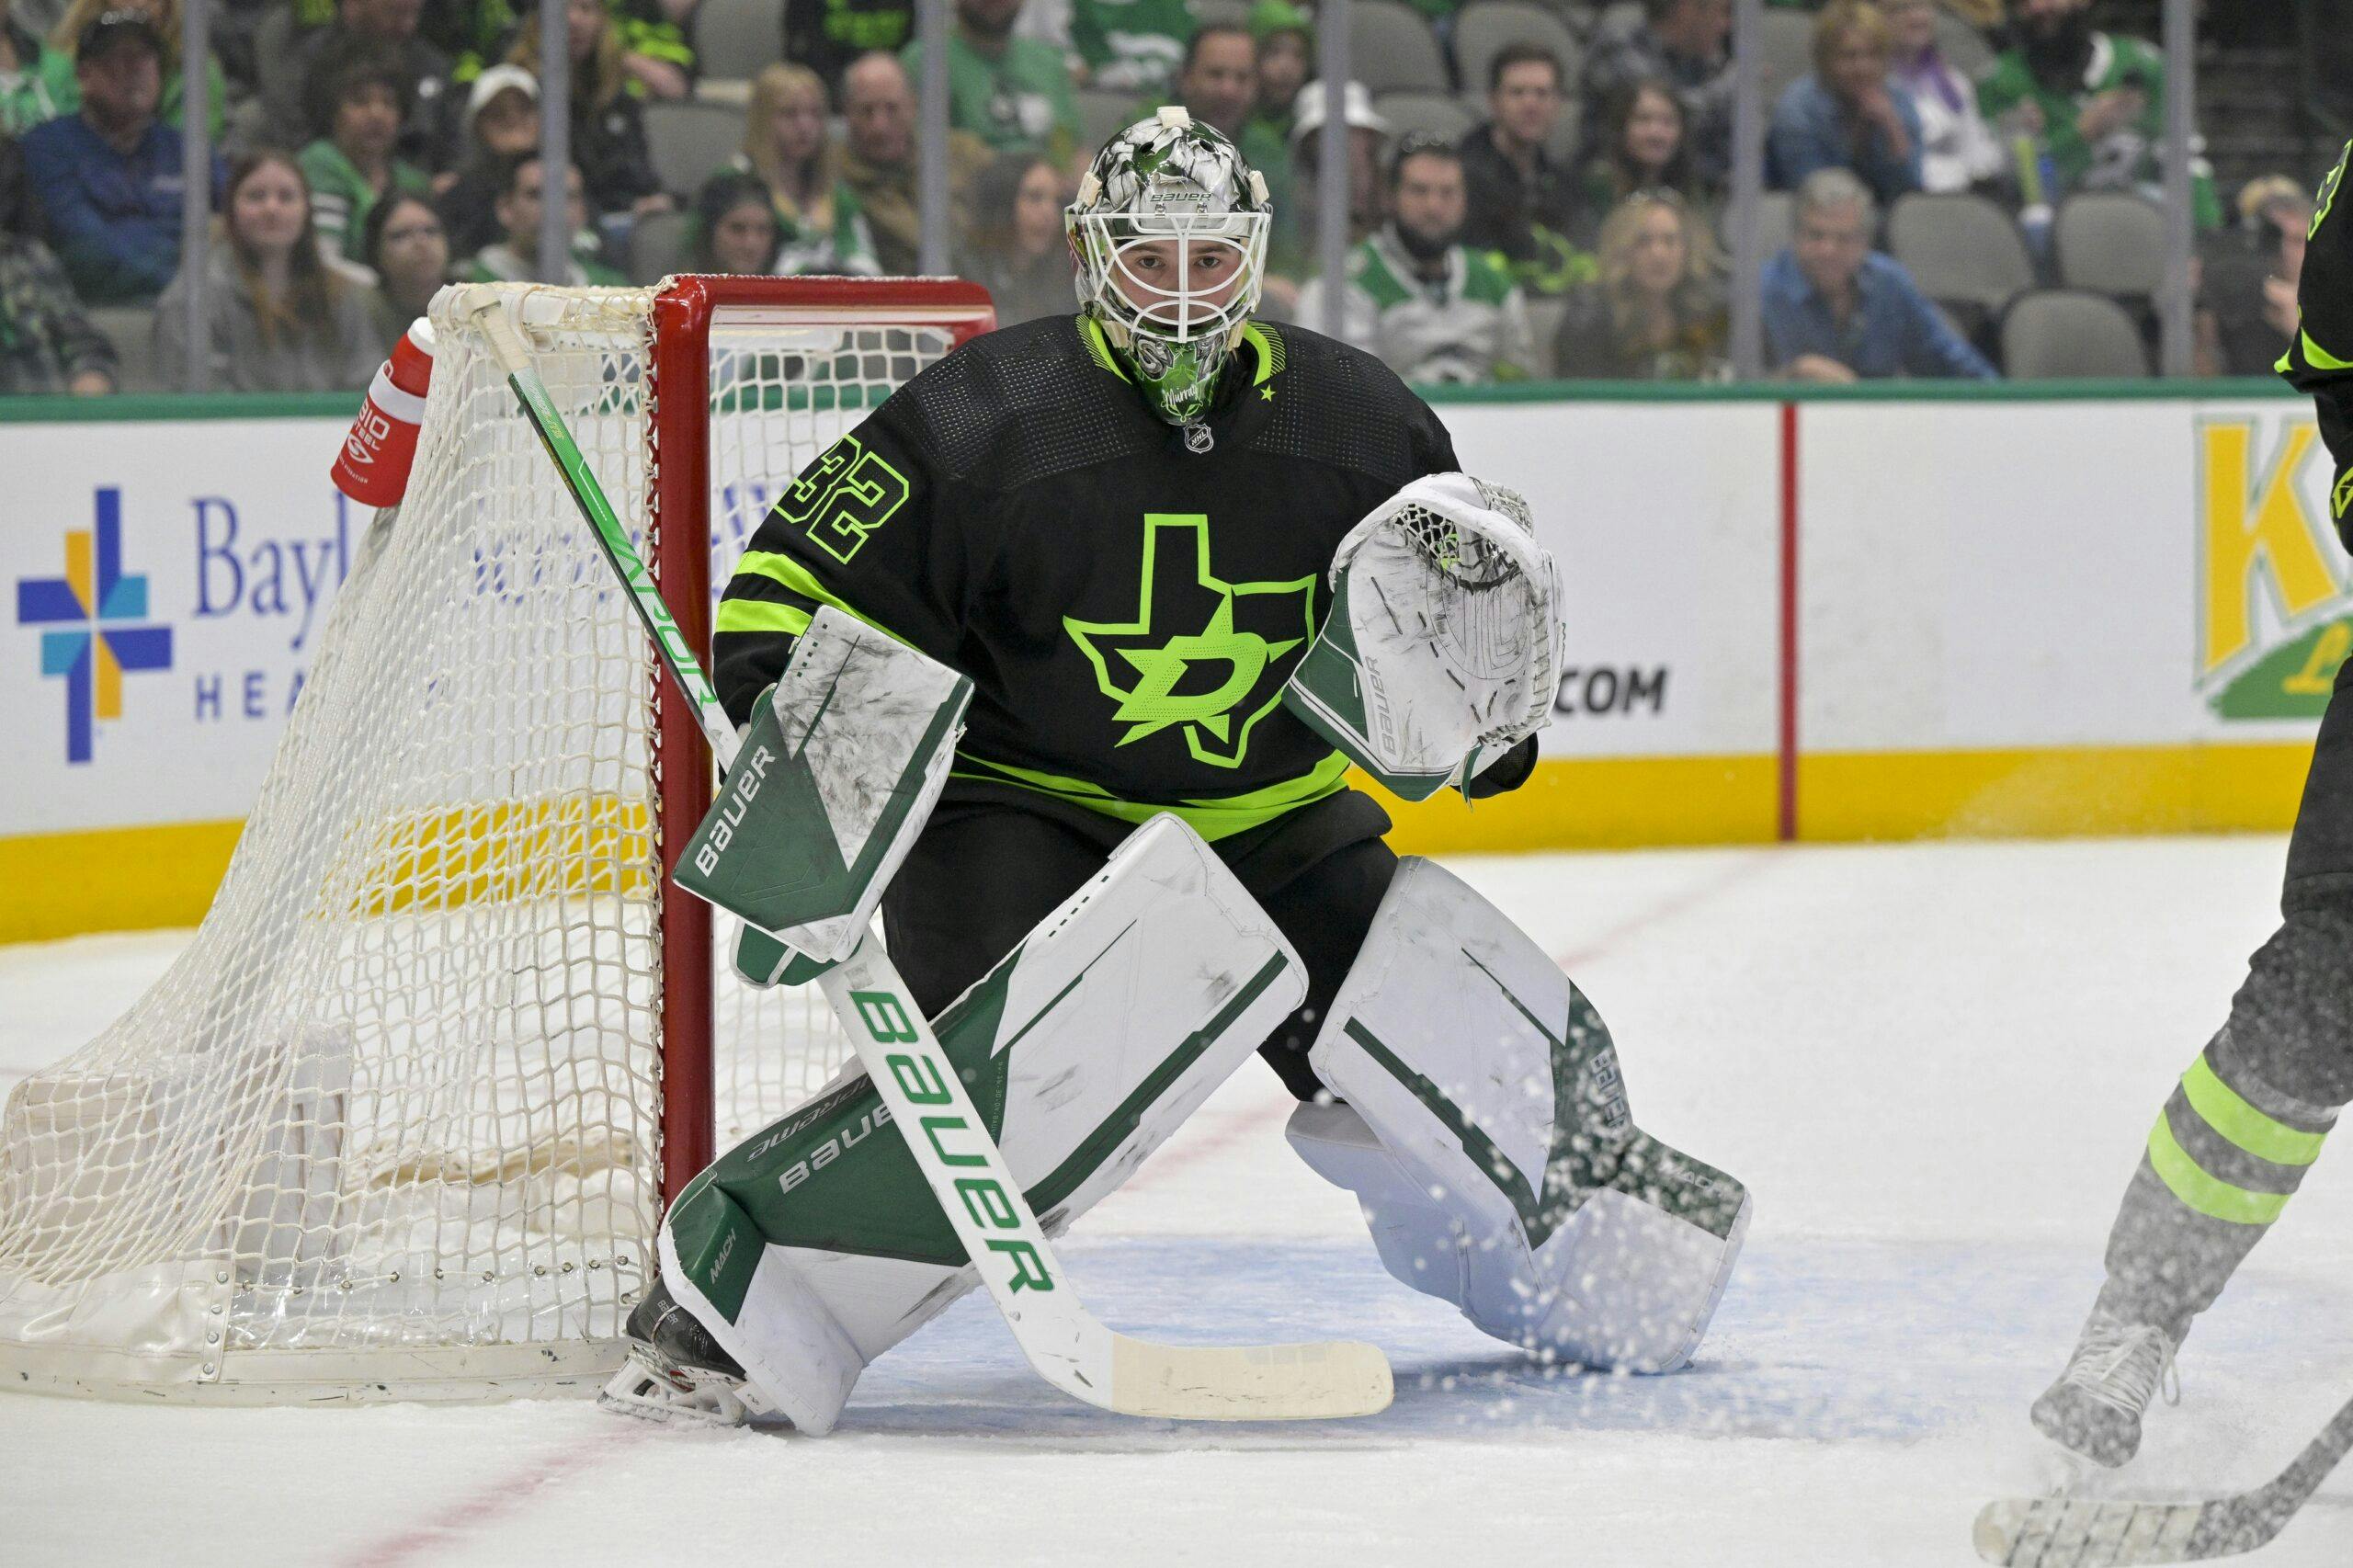 Two weeks before Dallas Stars unveil new jersey, Texas Stars show